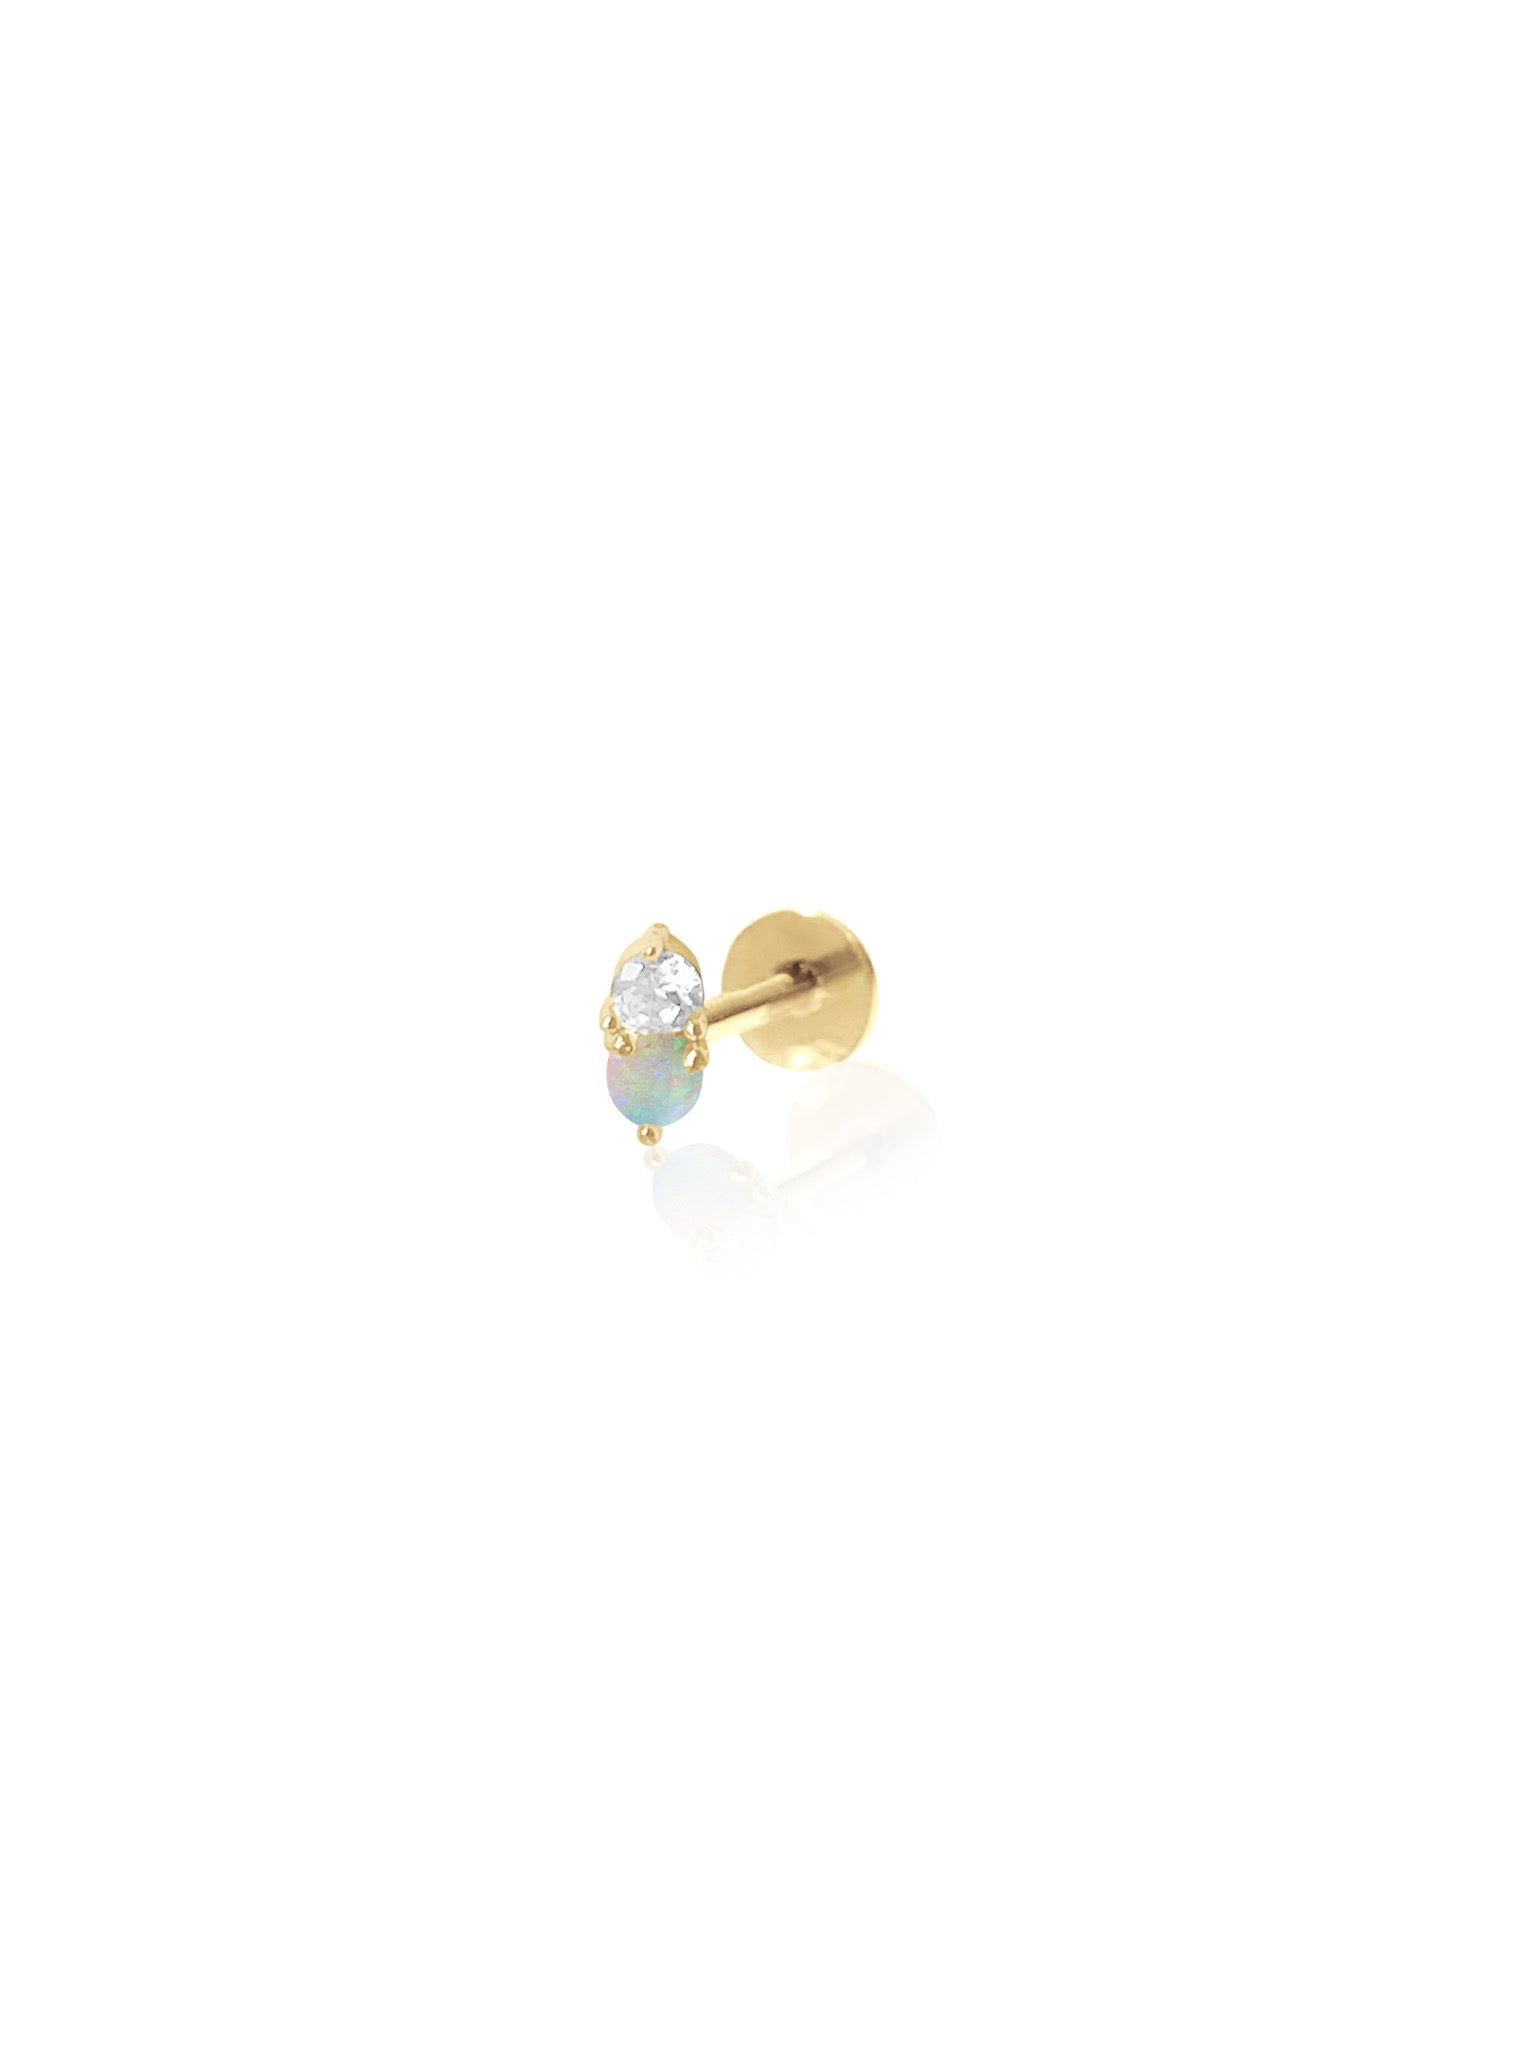 14K Solid White & Yellow Gold Replacement Single Push Back for Stud Earrings